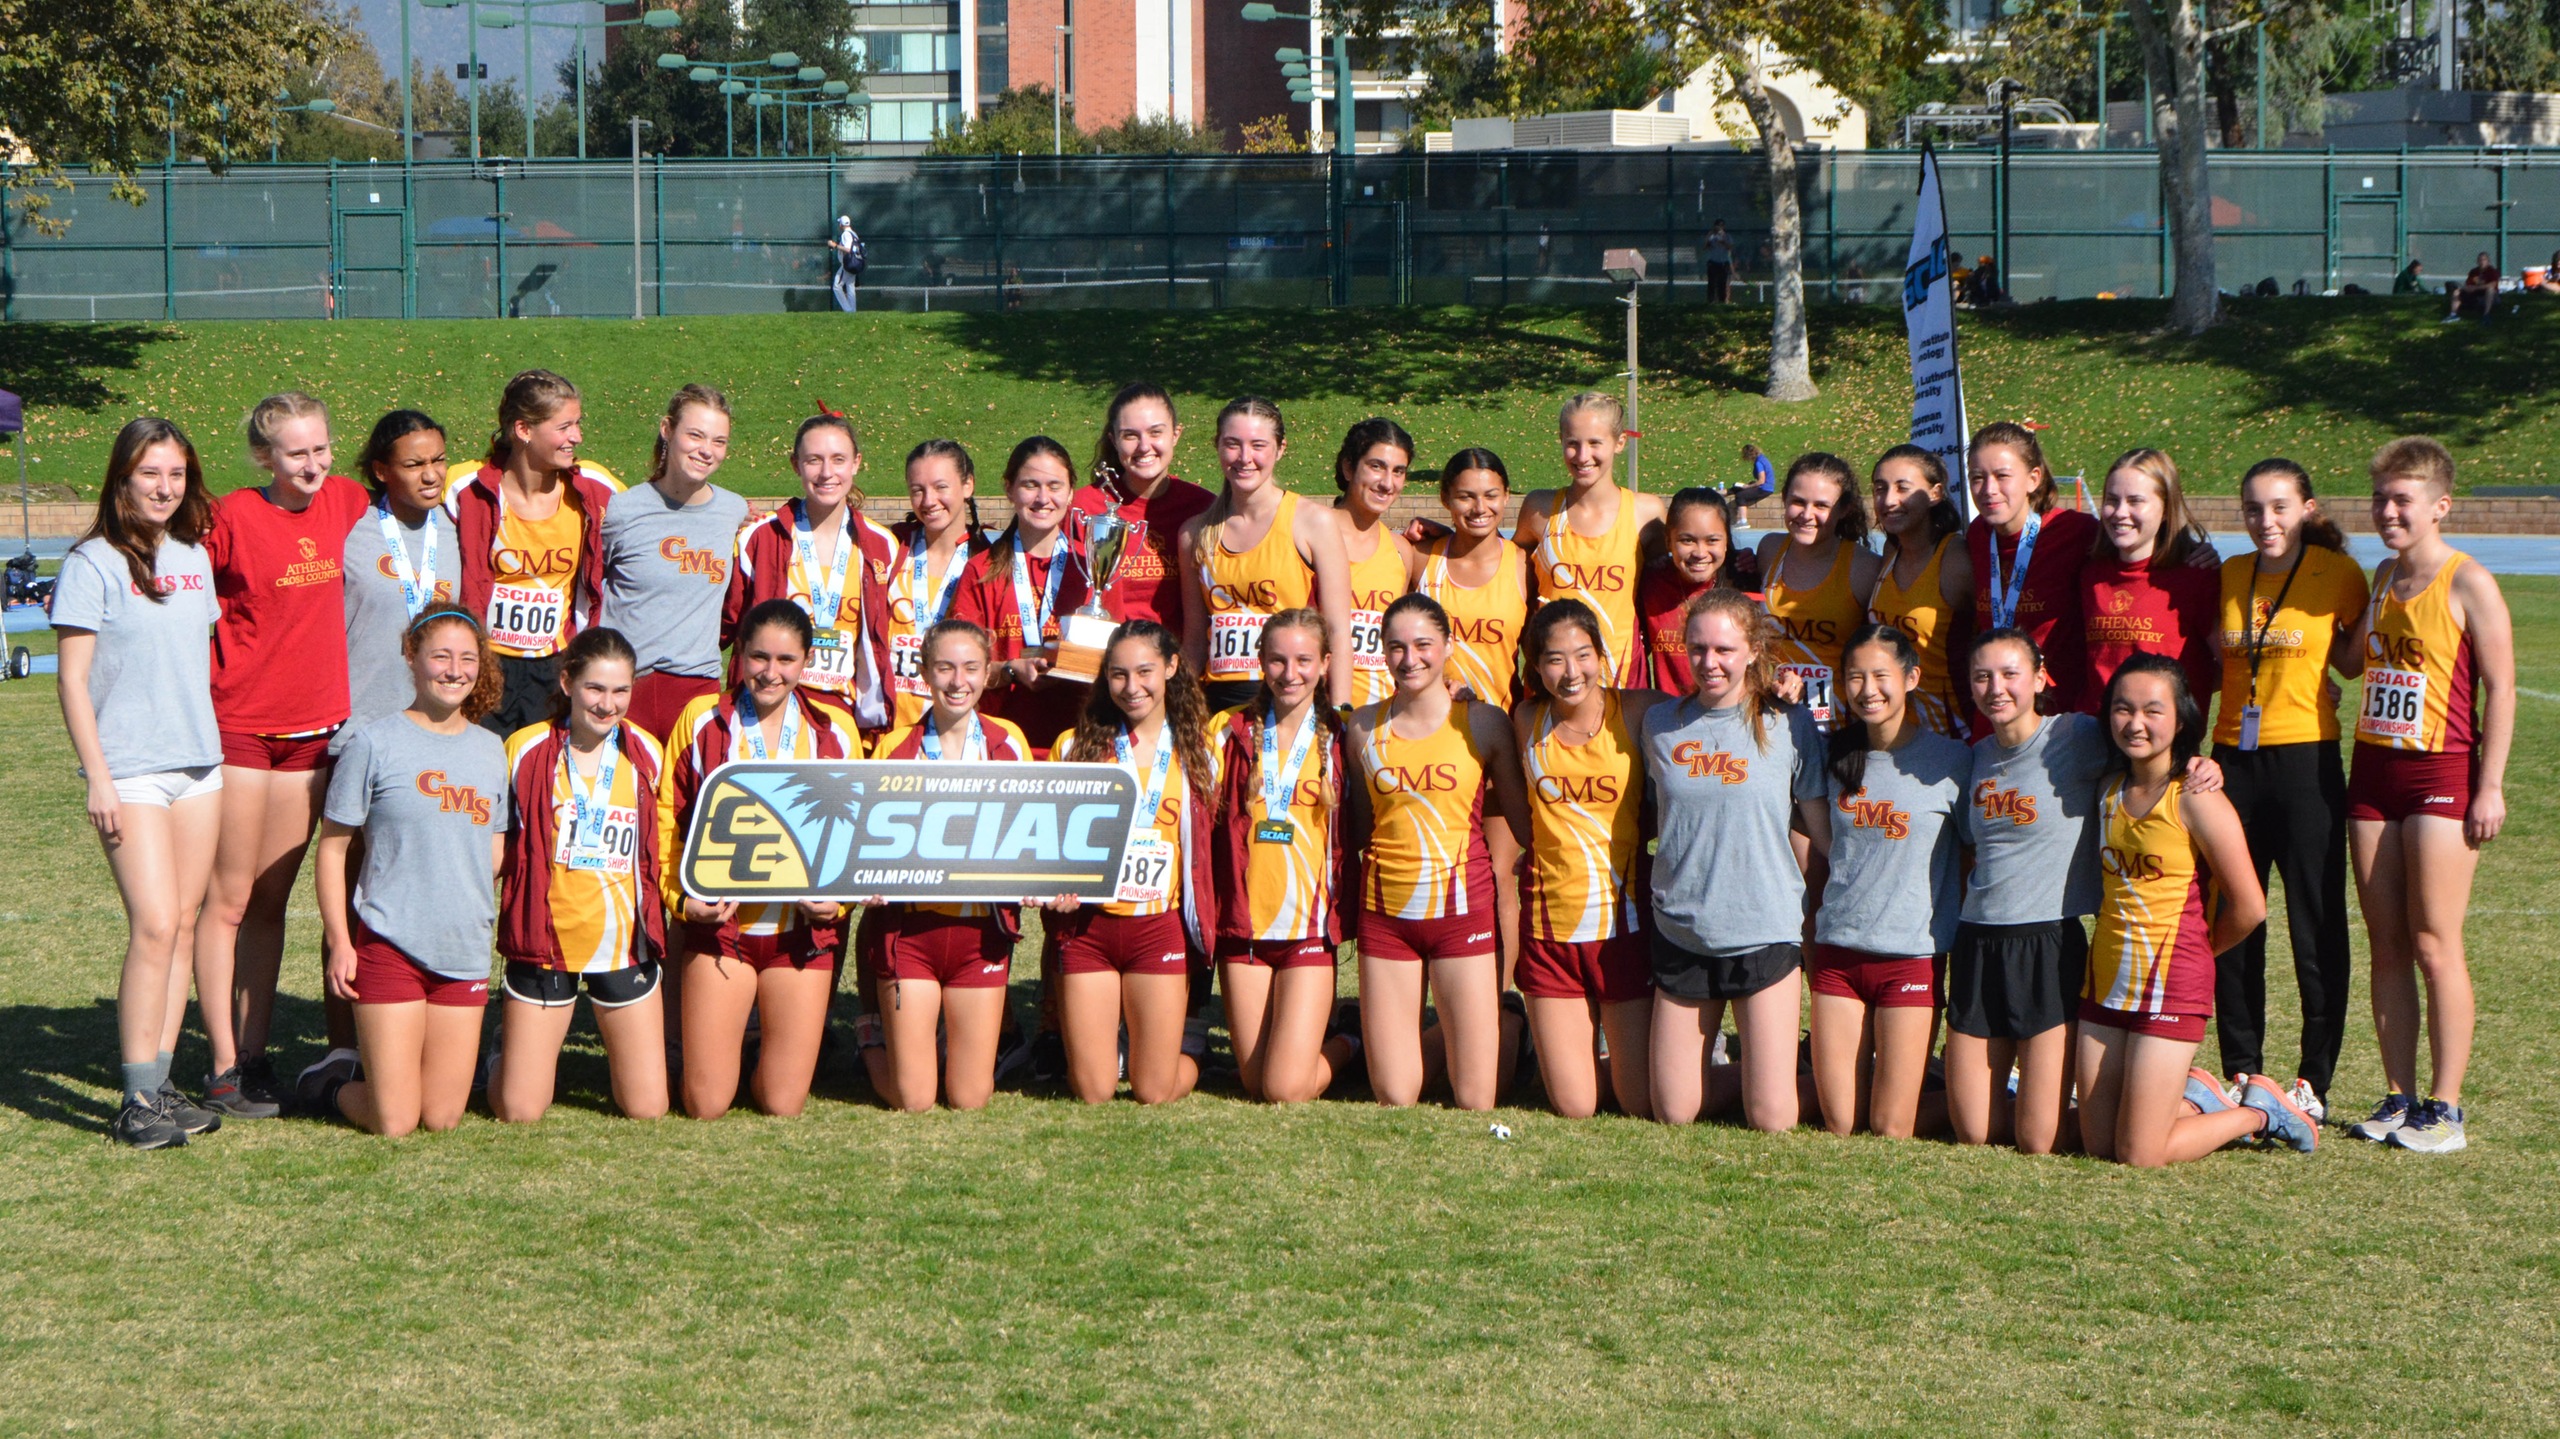 Winning SCIAC titles has been a habit for CMS women's cross country lately